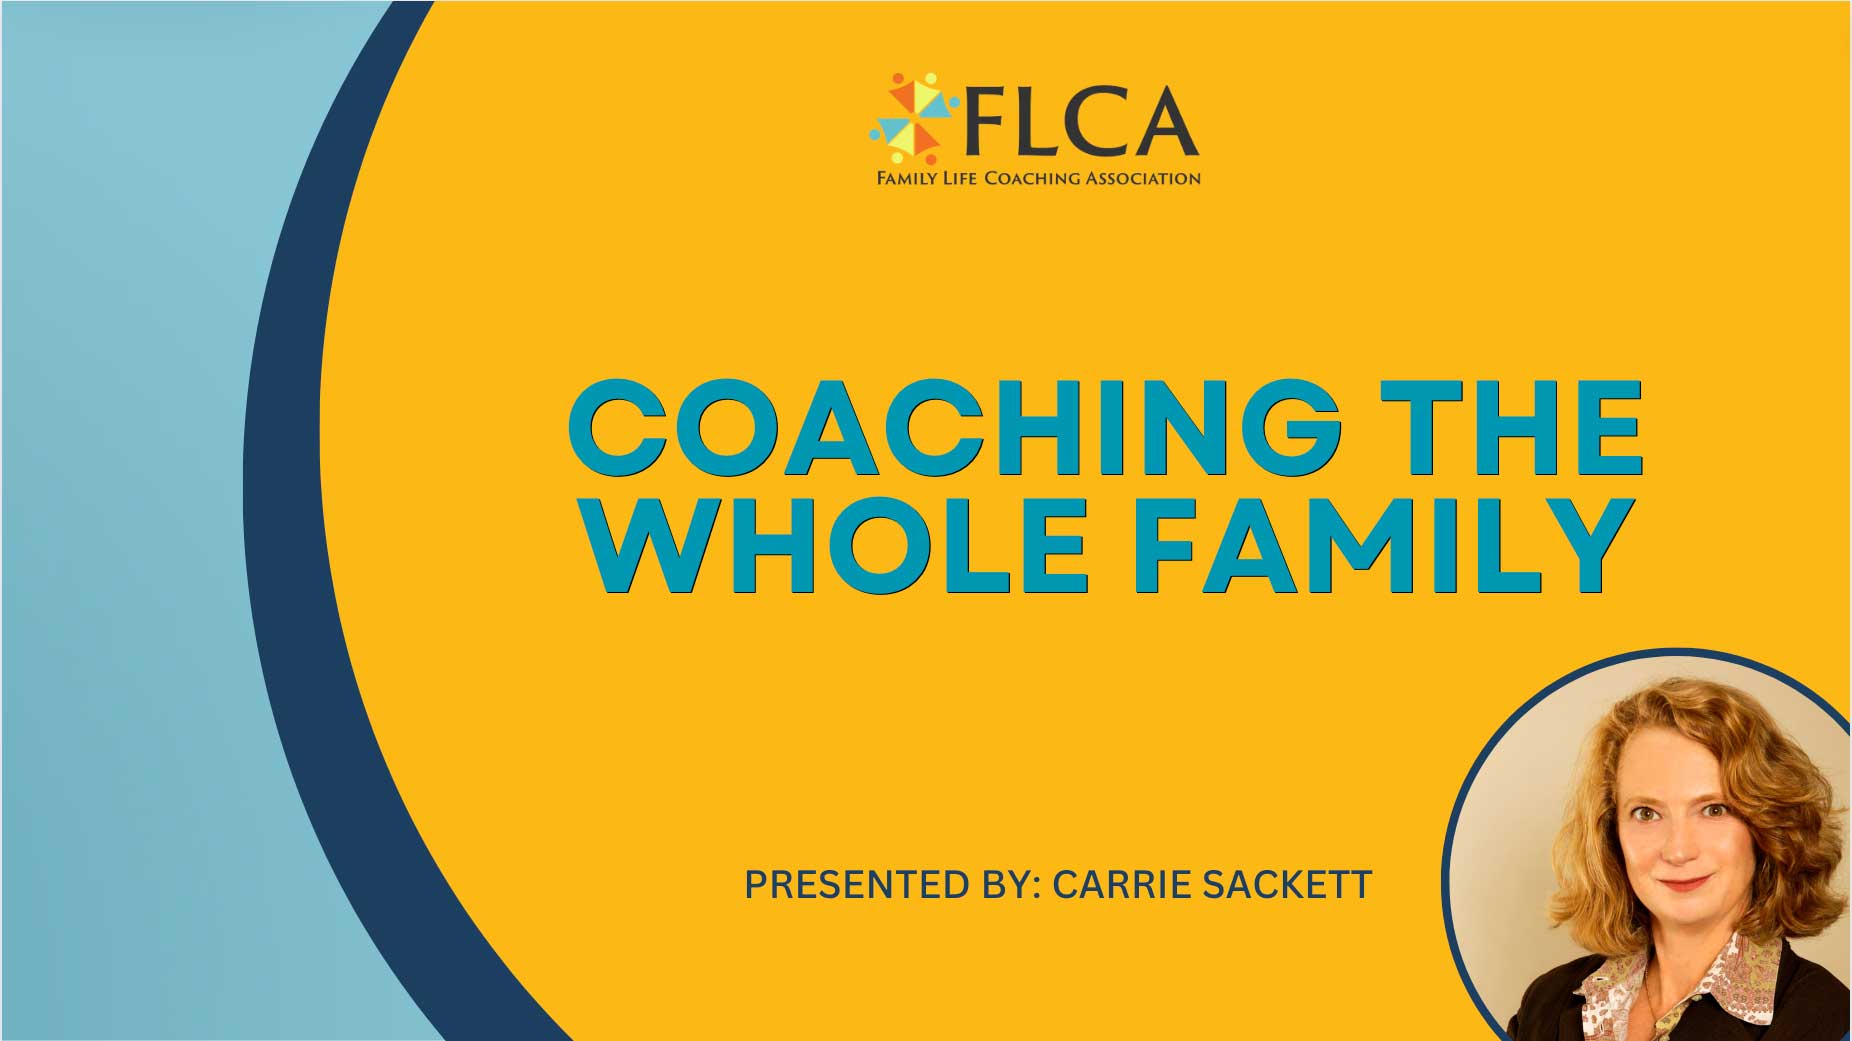 Coaching The Whole Family event